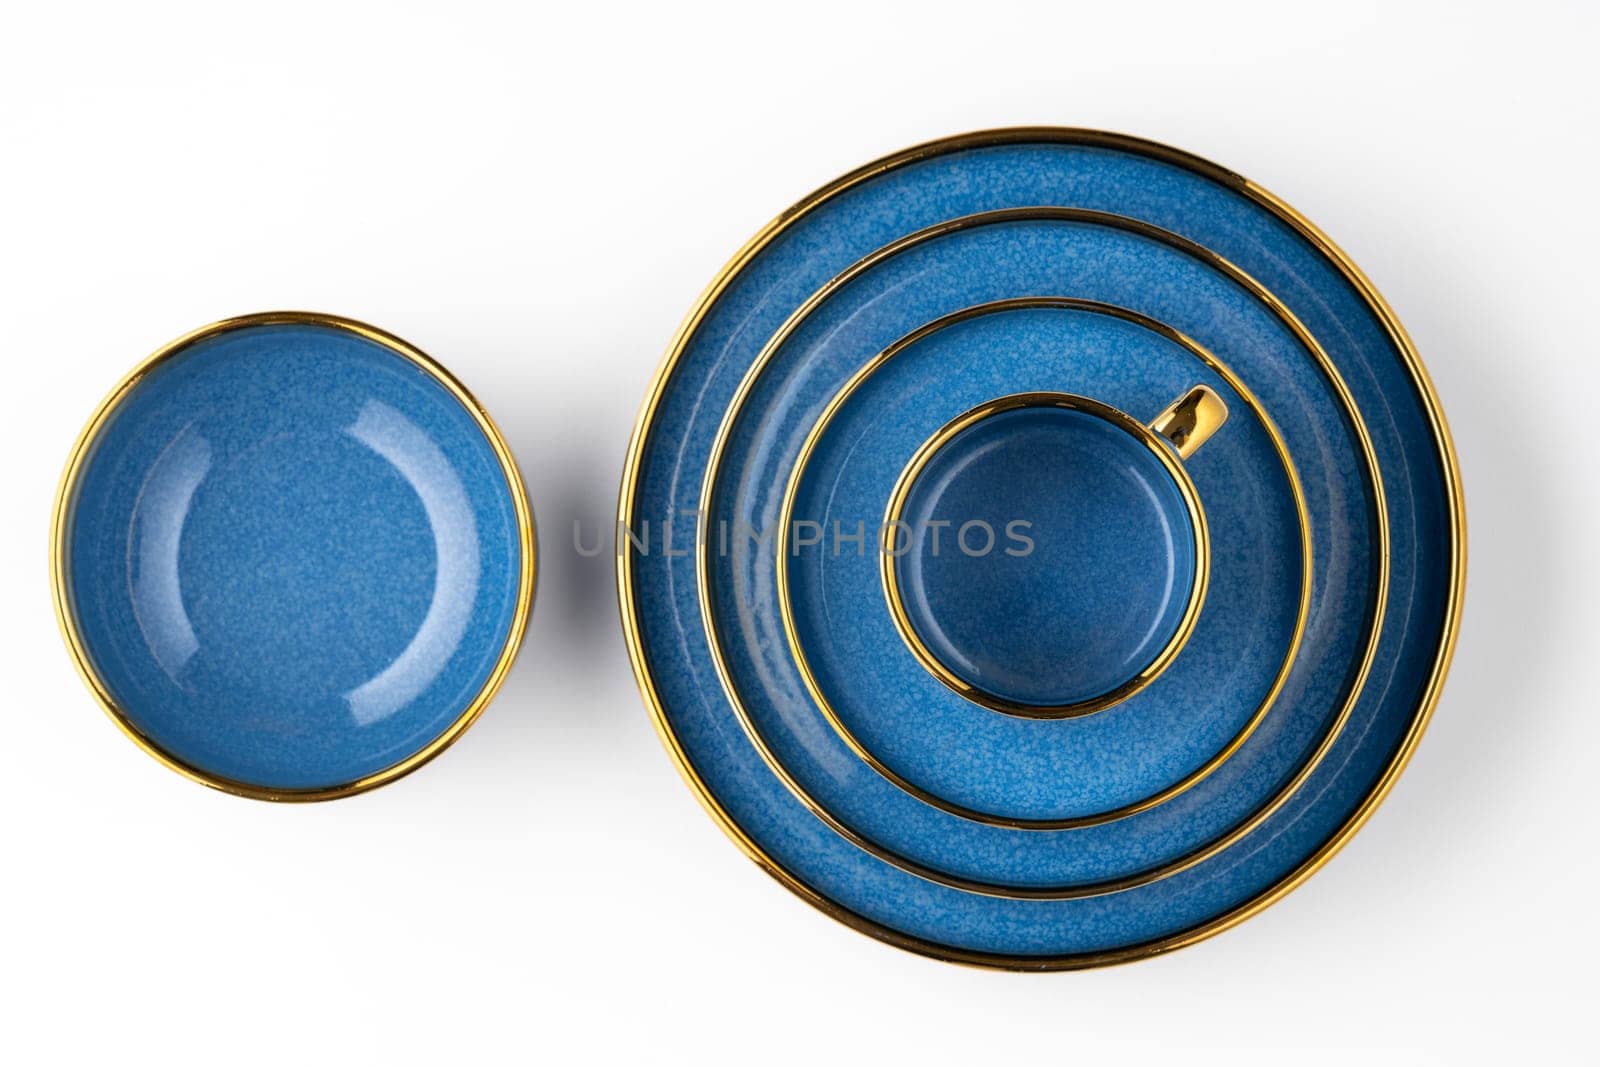 A set of blue ceramic plates and cup on a white background. Top view